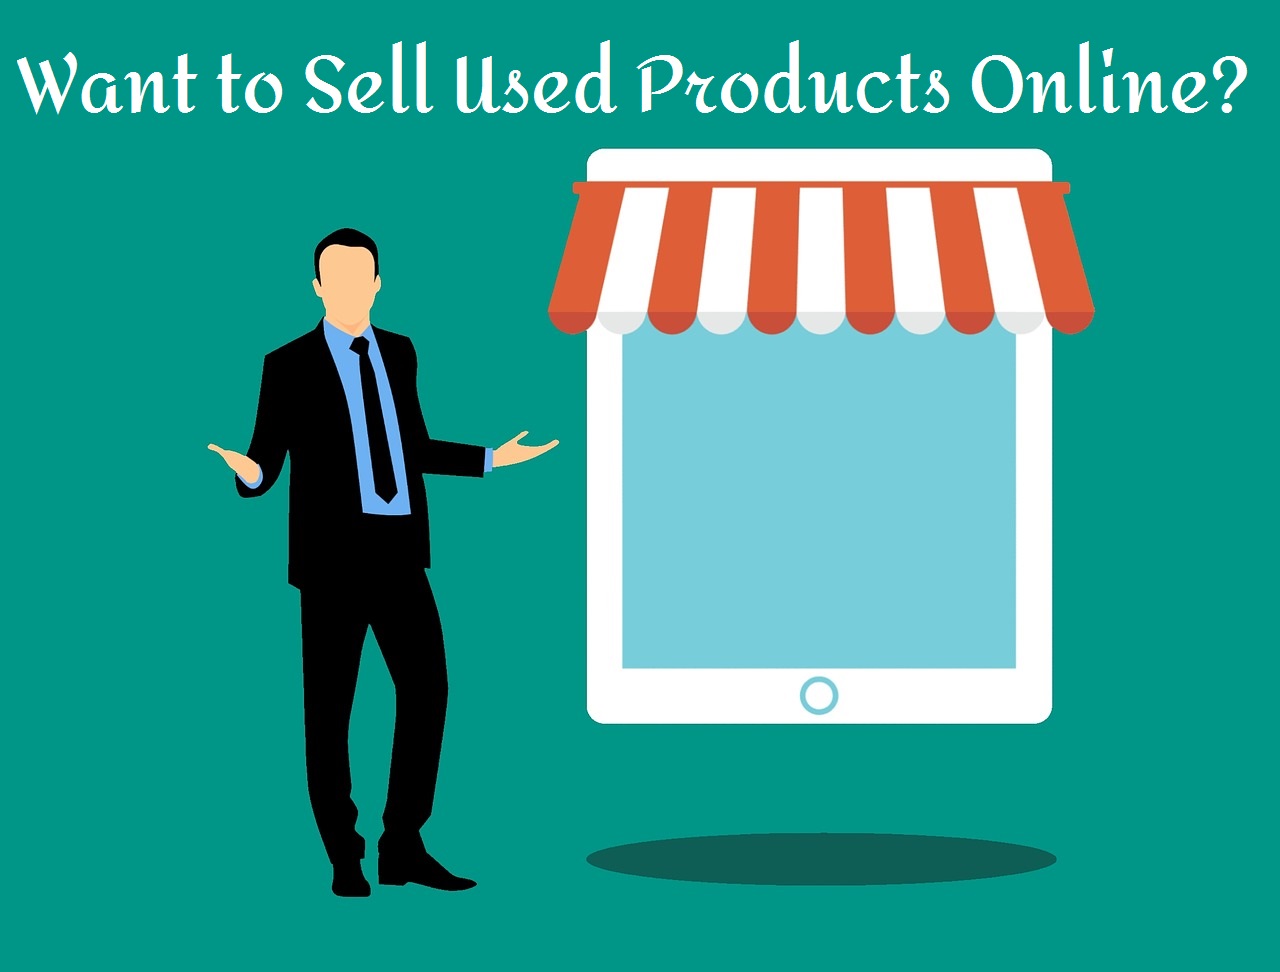 How to sell used products online?